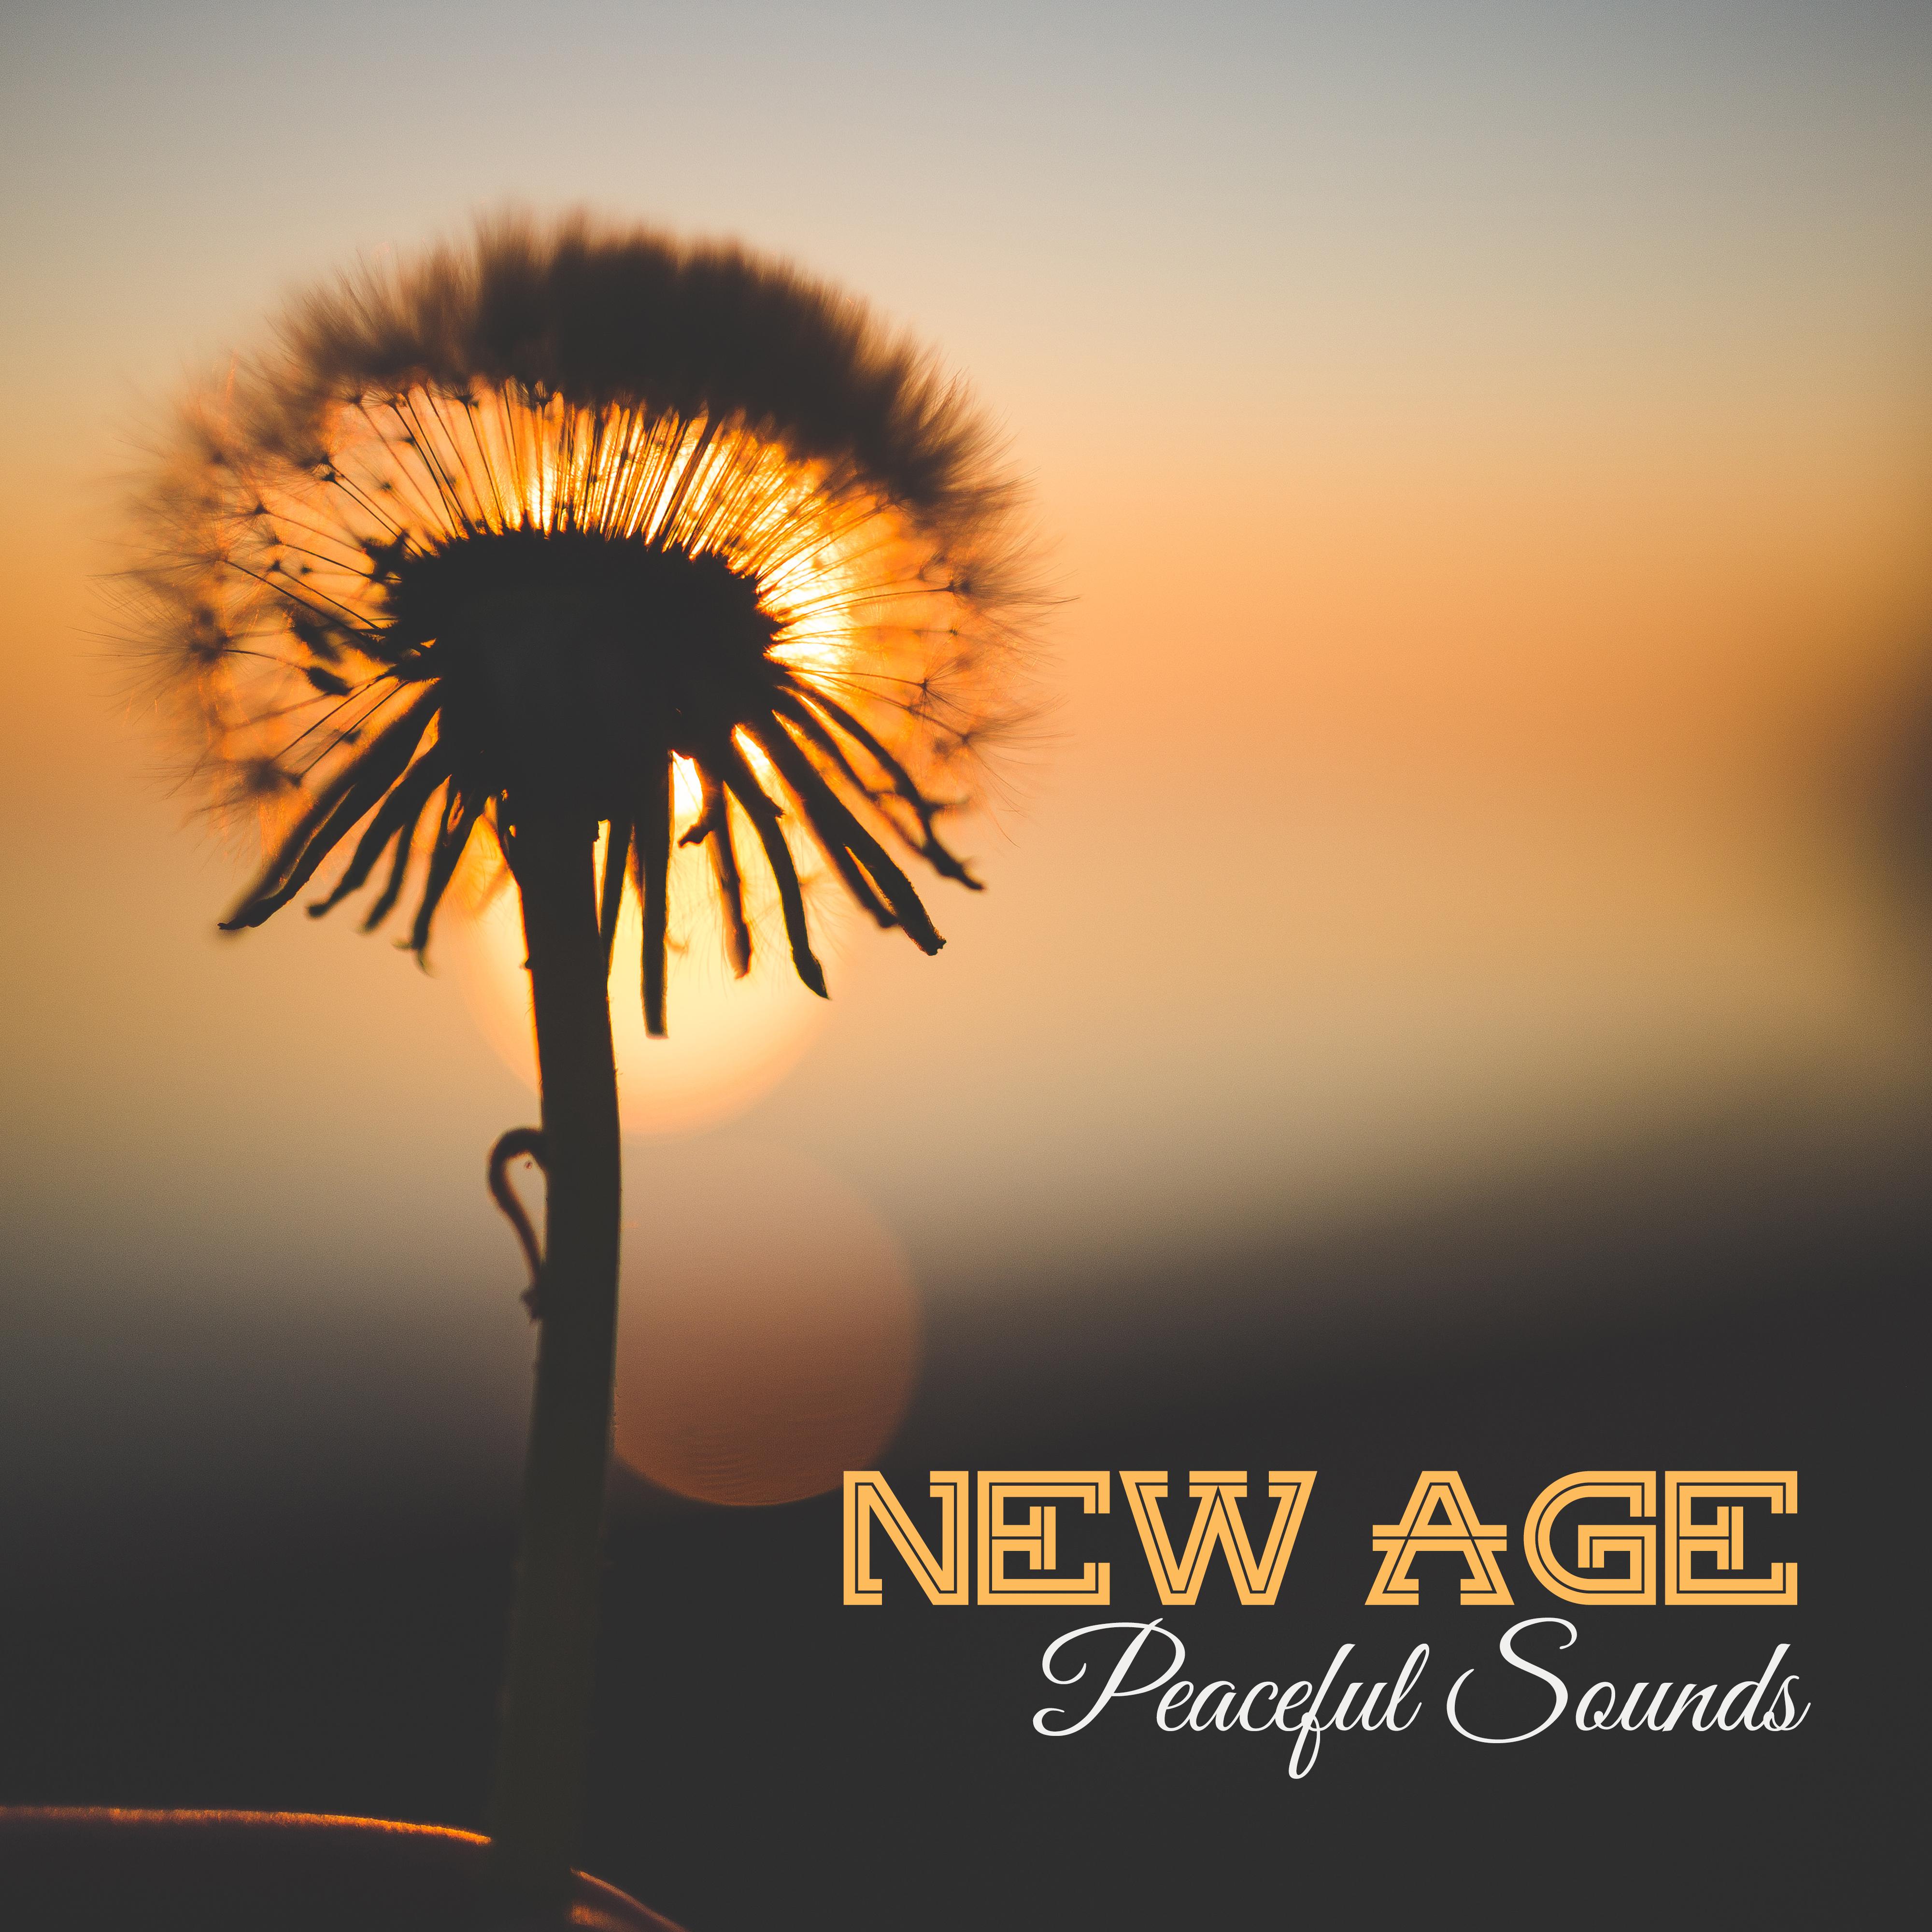 New Age Peaceful Sounds  Soothing Melodies, Nature Waves, Healing Therapy, Mind Peace